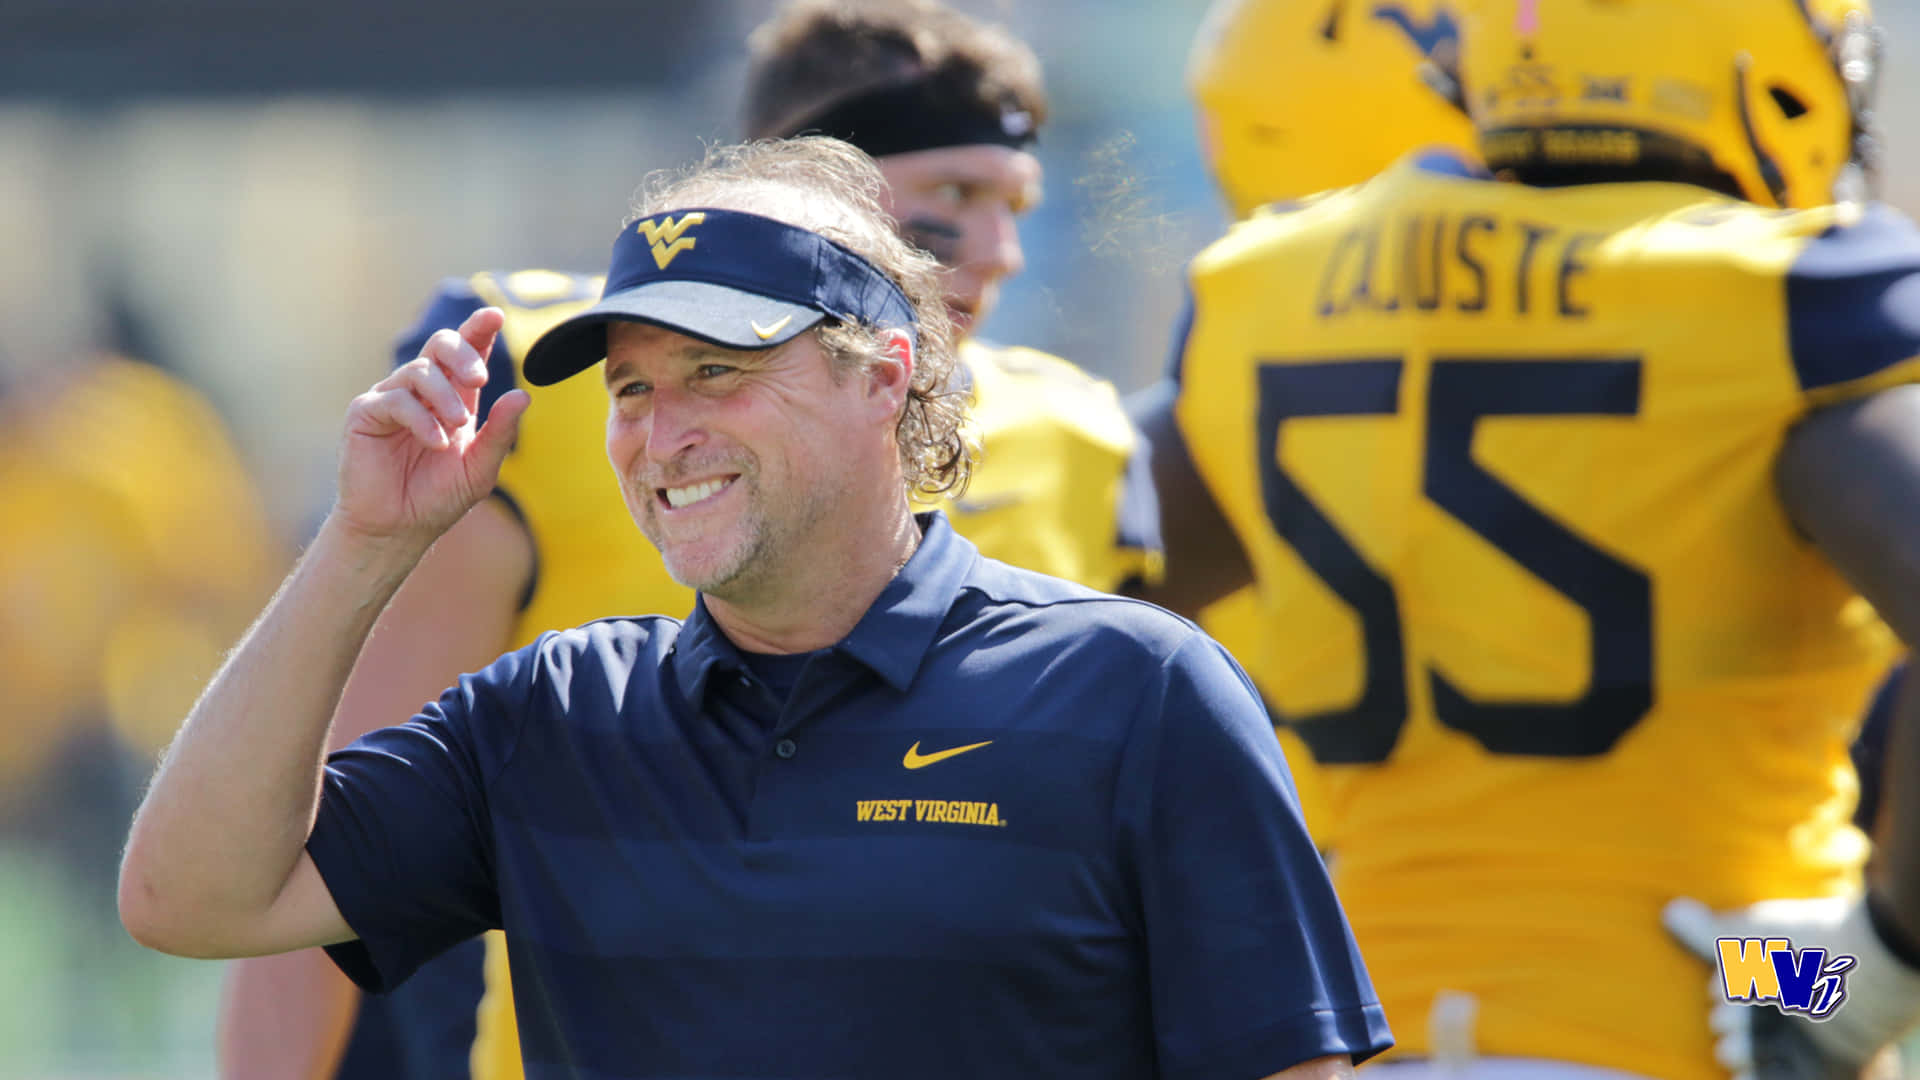 Cheering On The West Virginia Mountaineers Background